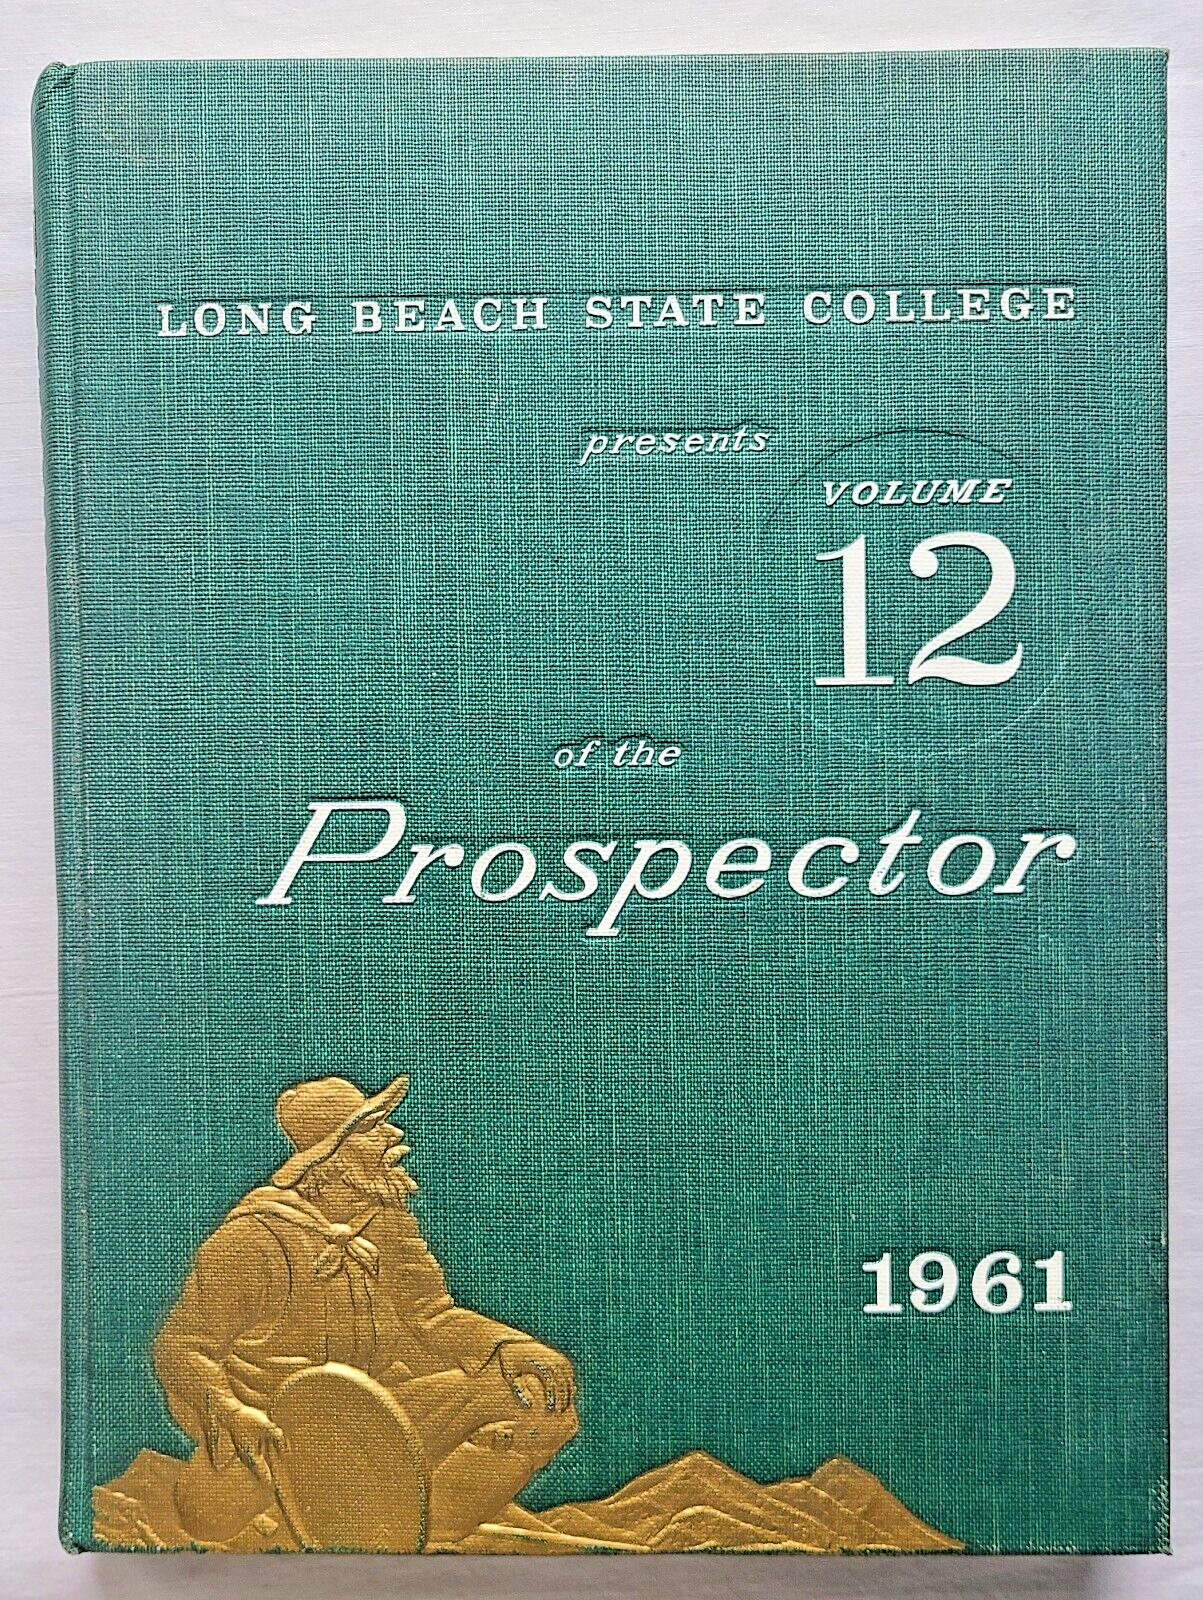 Long Beach State College Yearbook Prospector 1961 Volume 12